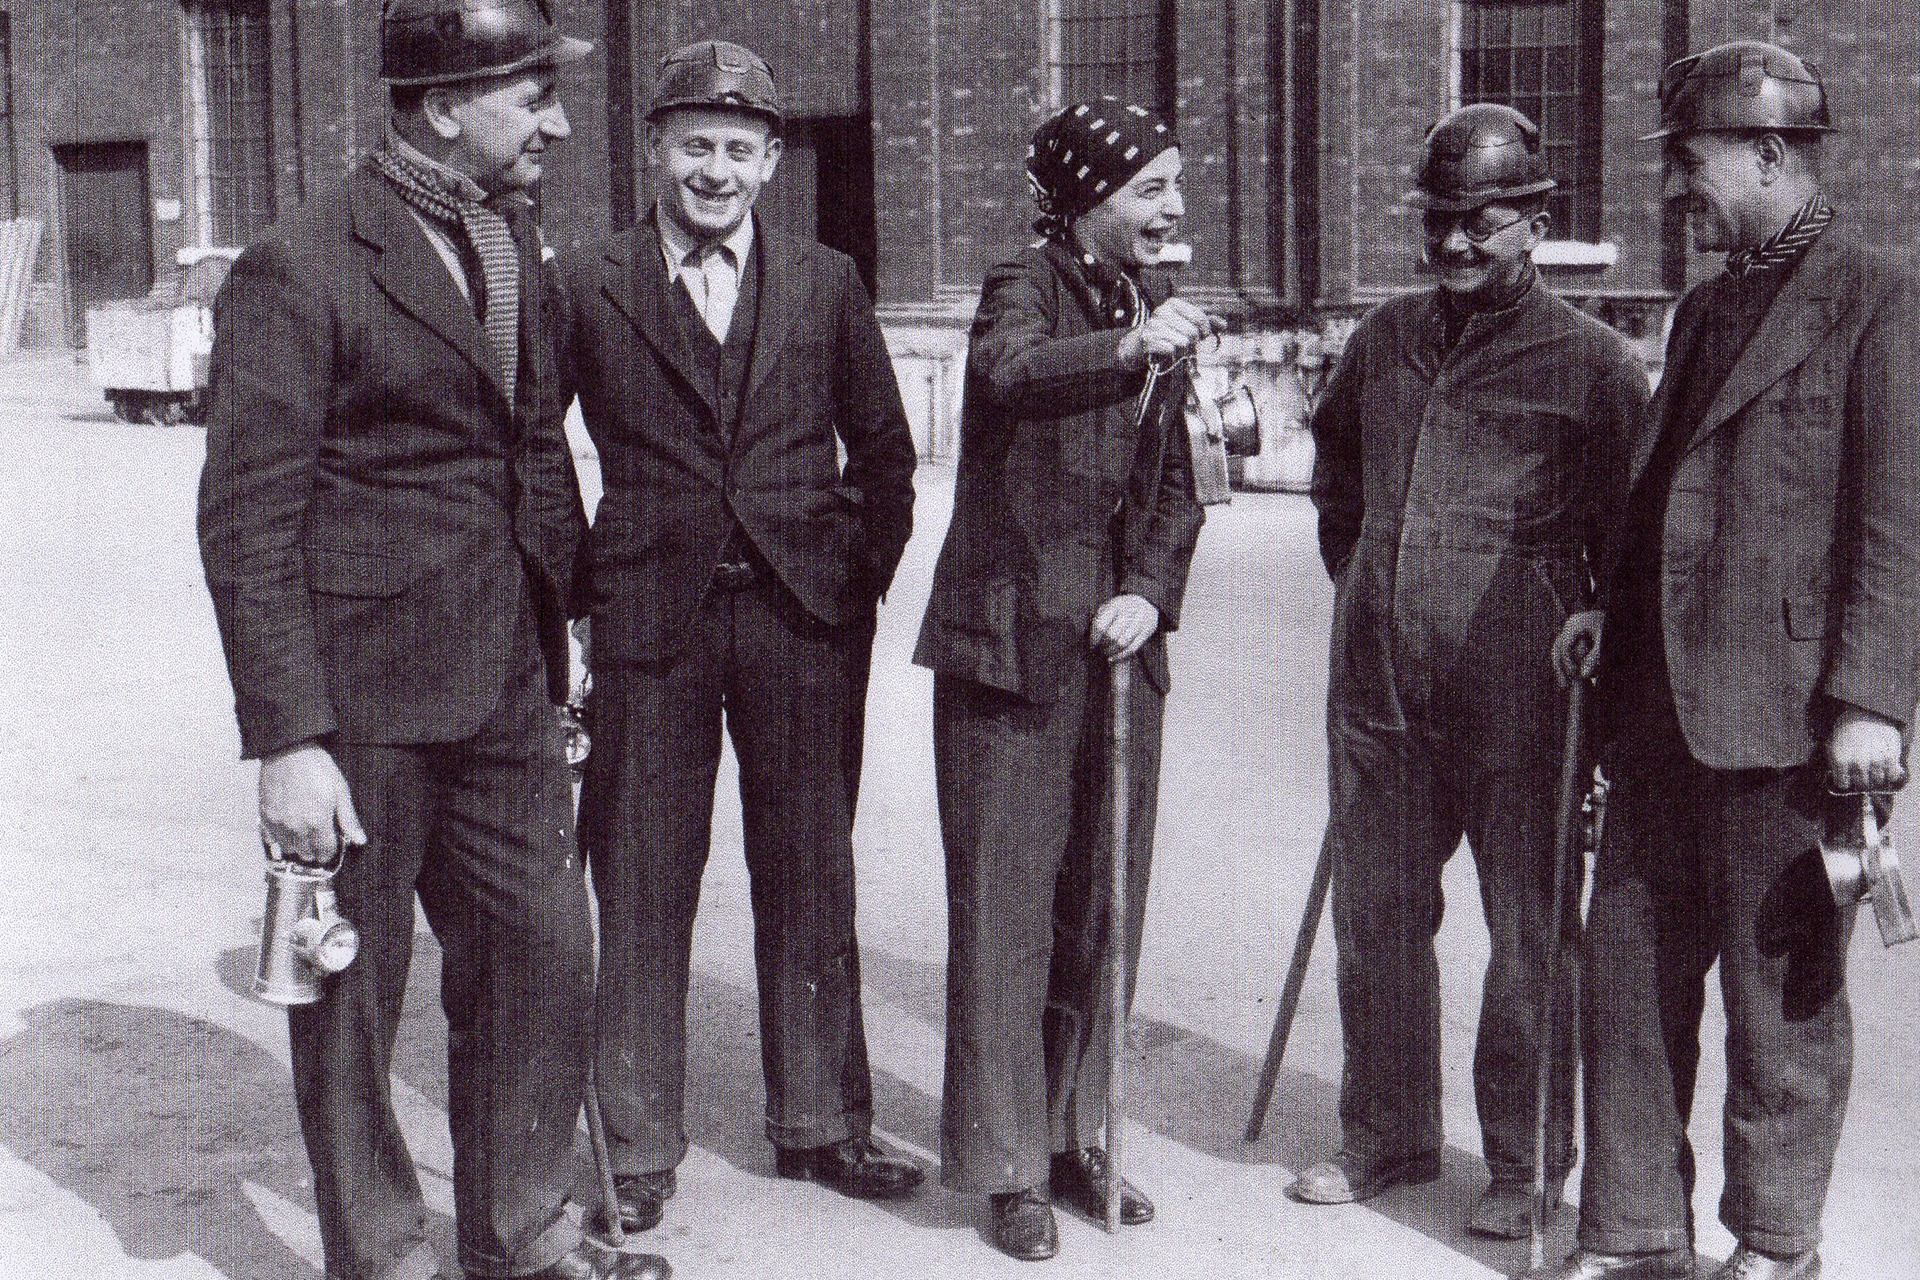 Black and white photograph of 5 people in suits standing outside in an industrial yard. Monica Maurice is in the middle of the group, wearing a trouser suit and a headscarf